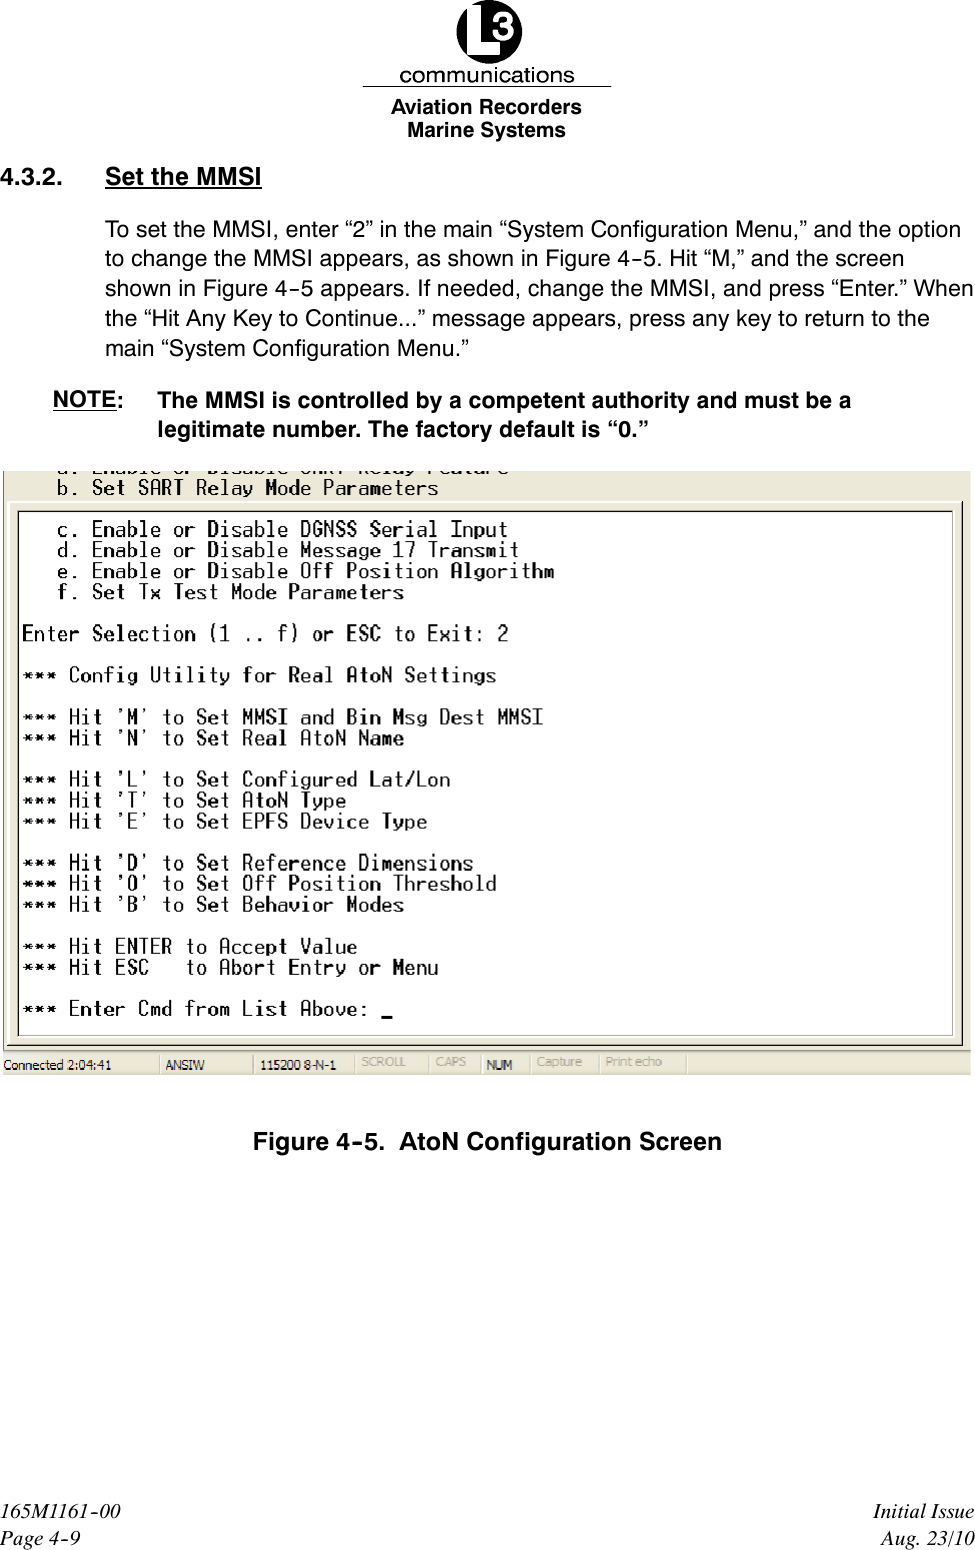 Marine SystemsAviation RecordersPage 4--9Initial Issue165M1161--00Aug. 23/104.3.2. Set the MMSITo set the MMSI, enter “2” in the main “System Configuration Menu,” and the optionto change the MMSI appears, as shown in Figure 4--5. Hit “M,” and the screenshown in Figure 4--5 appears. If needed, change the MMSI, and press “Enter.” Whenthe “Hit Any Key to Continue...” message appears, press any key to return to themain “System Configuration Menu.”NOTE: The MMSI is controlled by a competent authority and must be alegitimate number. The factory default is “0.”Figure 4--5. AtoN Configuration Screen